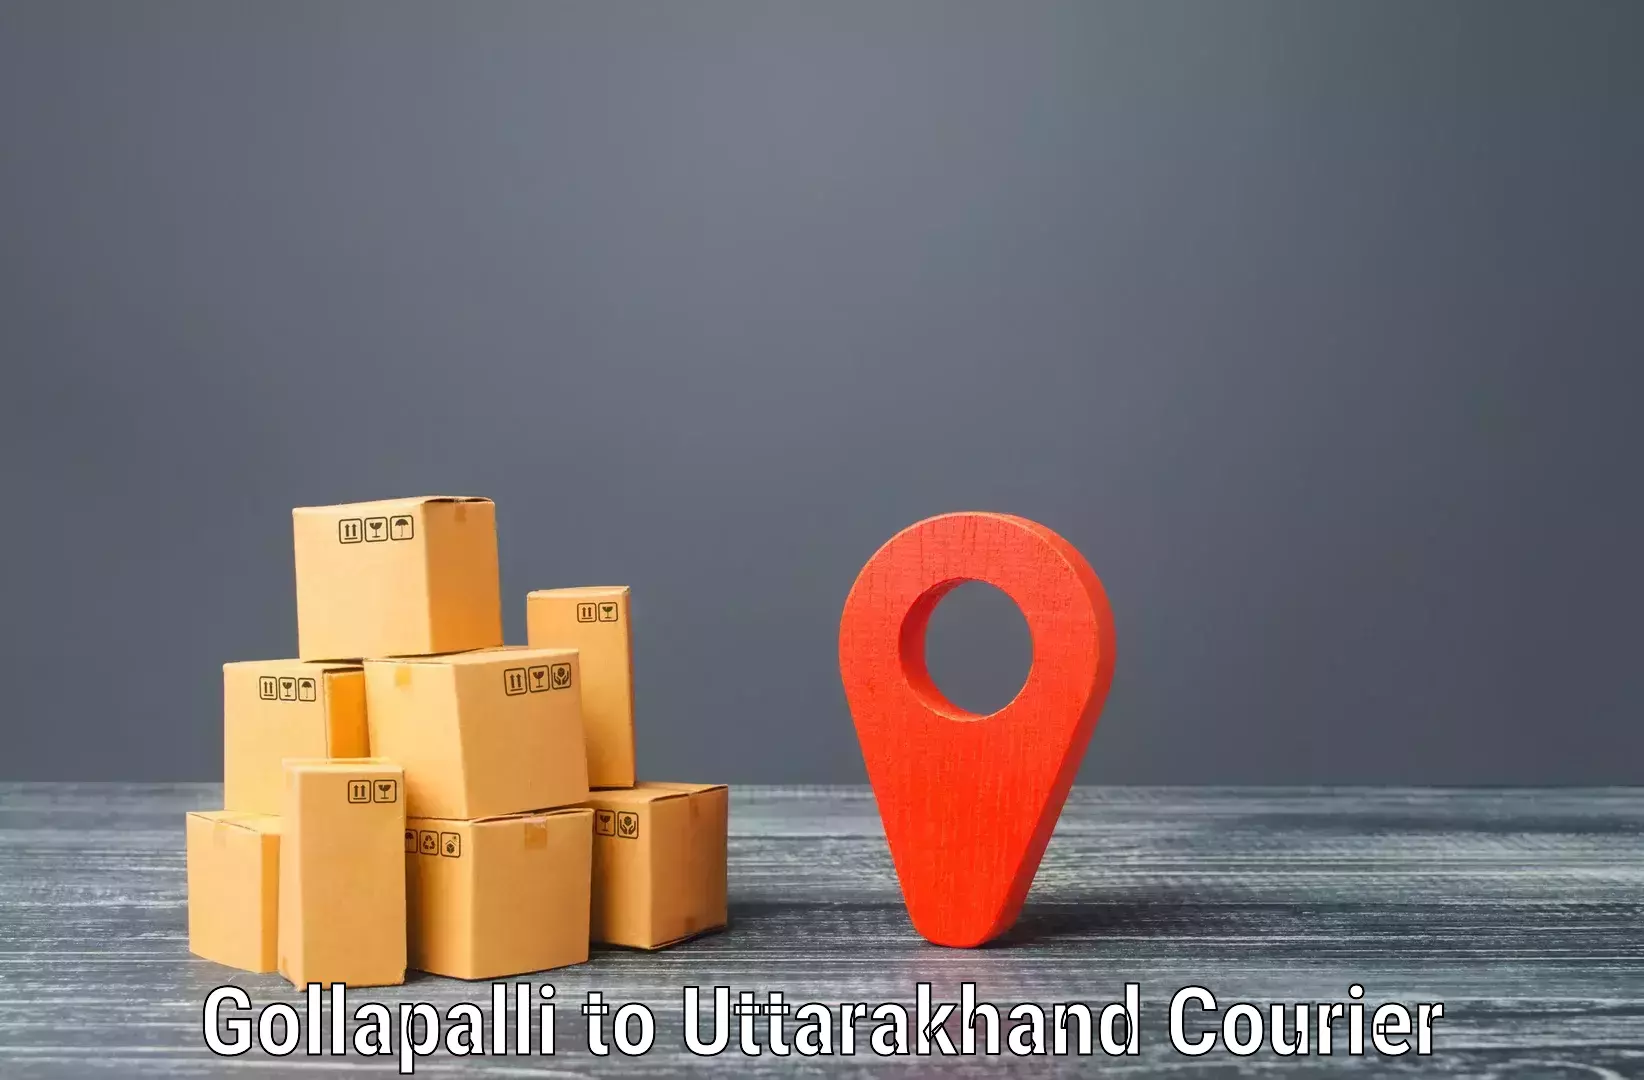 Efficient parcel service Gollapalli to Roorkee